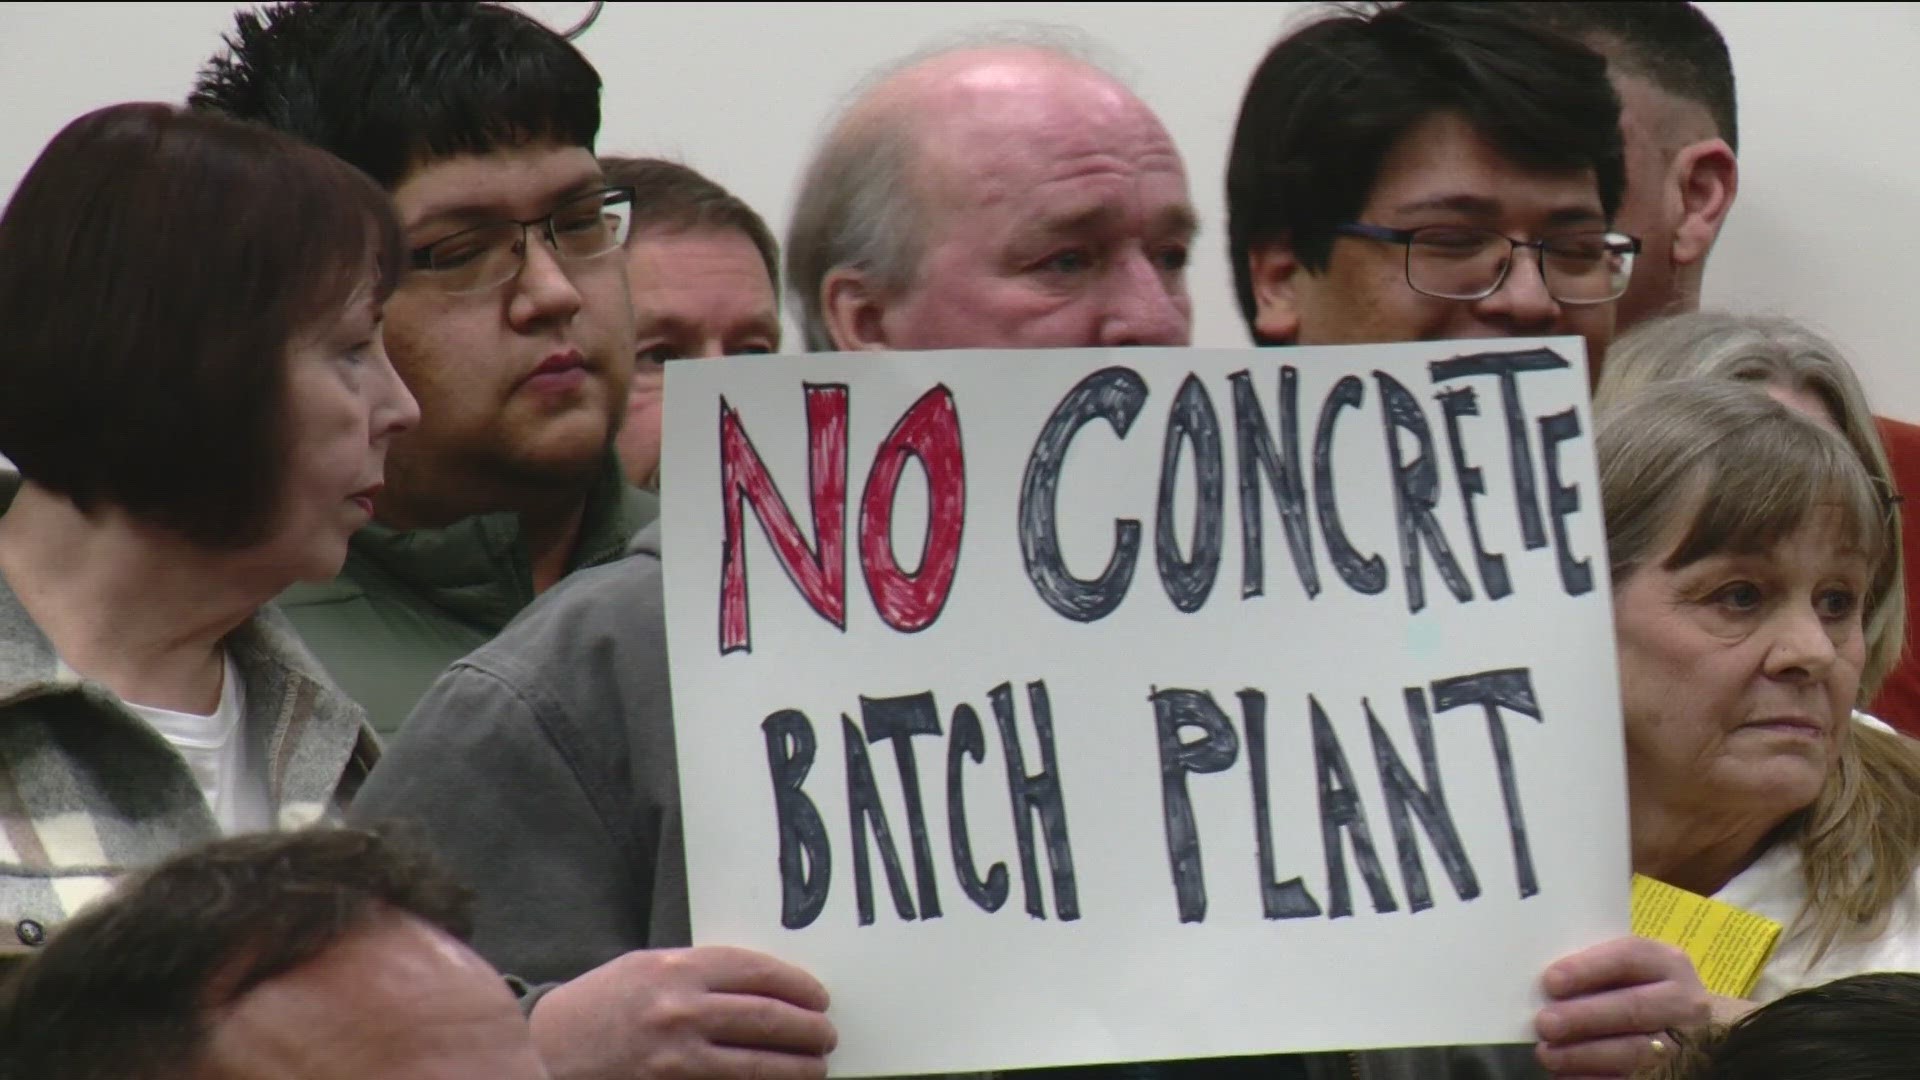 The controversial plan for a new concrete plant in Nampa was denied in a five to four vote.